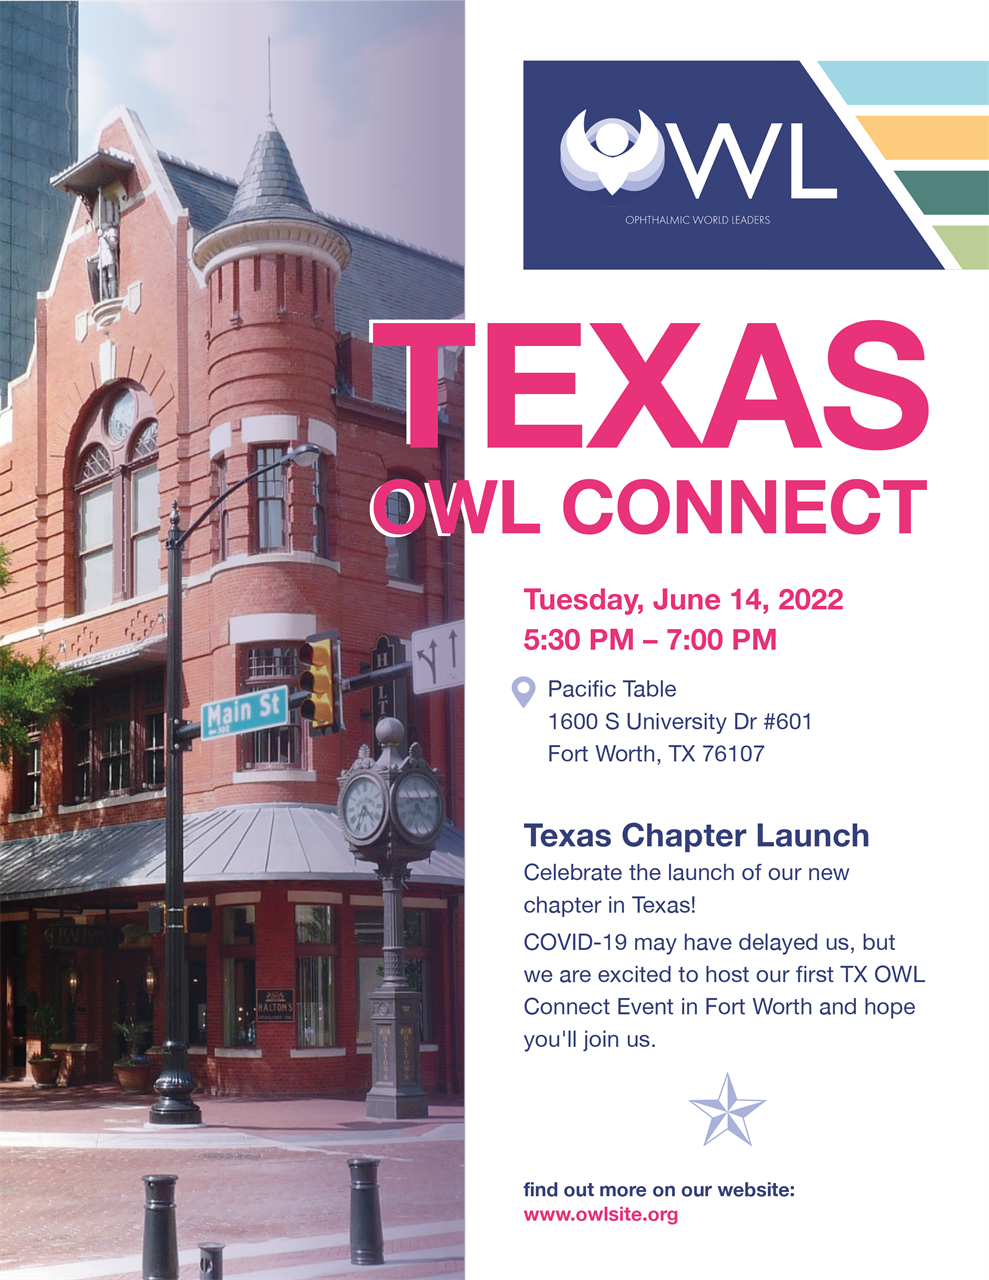 Texas OWL Connect (June 14th; 5:30 PM) Pacific Table, 1600 S University Dr #601, Fort Worth, TX | Celebrate the launch of our new chapter in Texas!